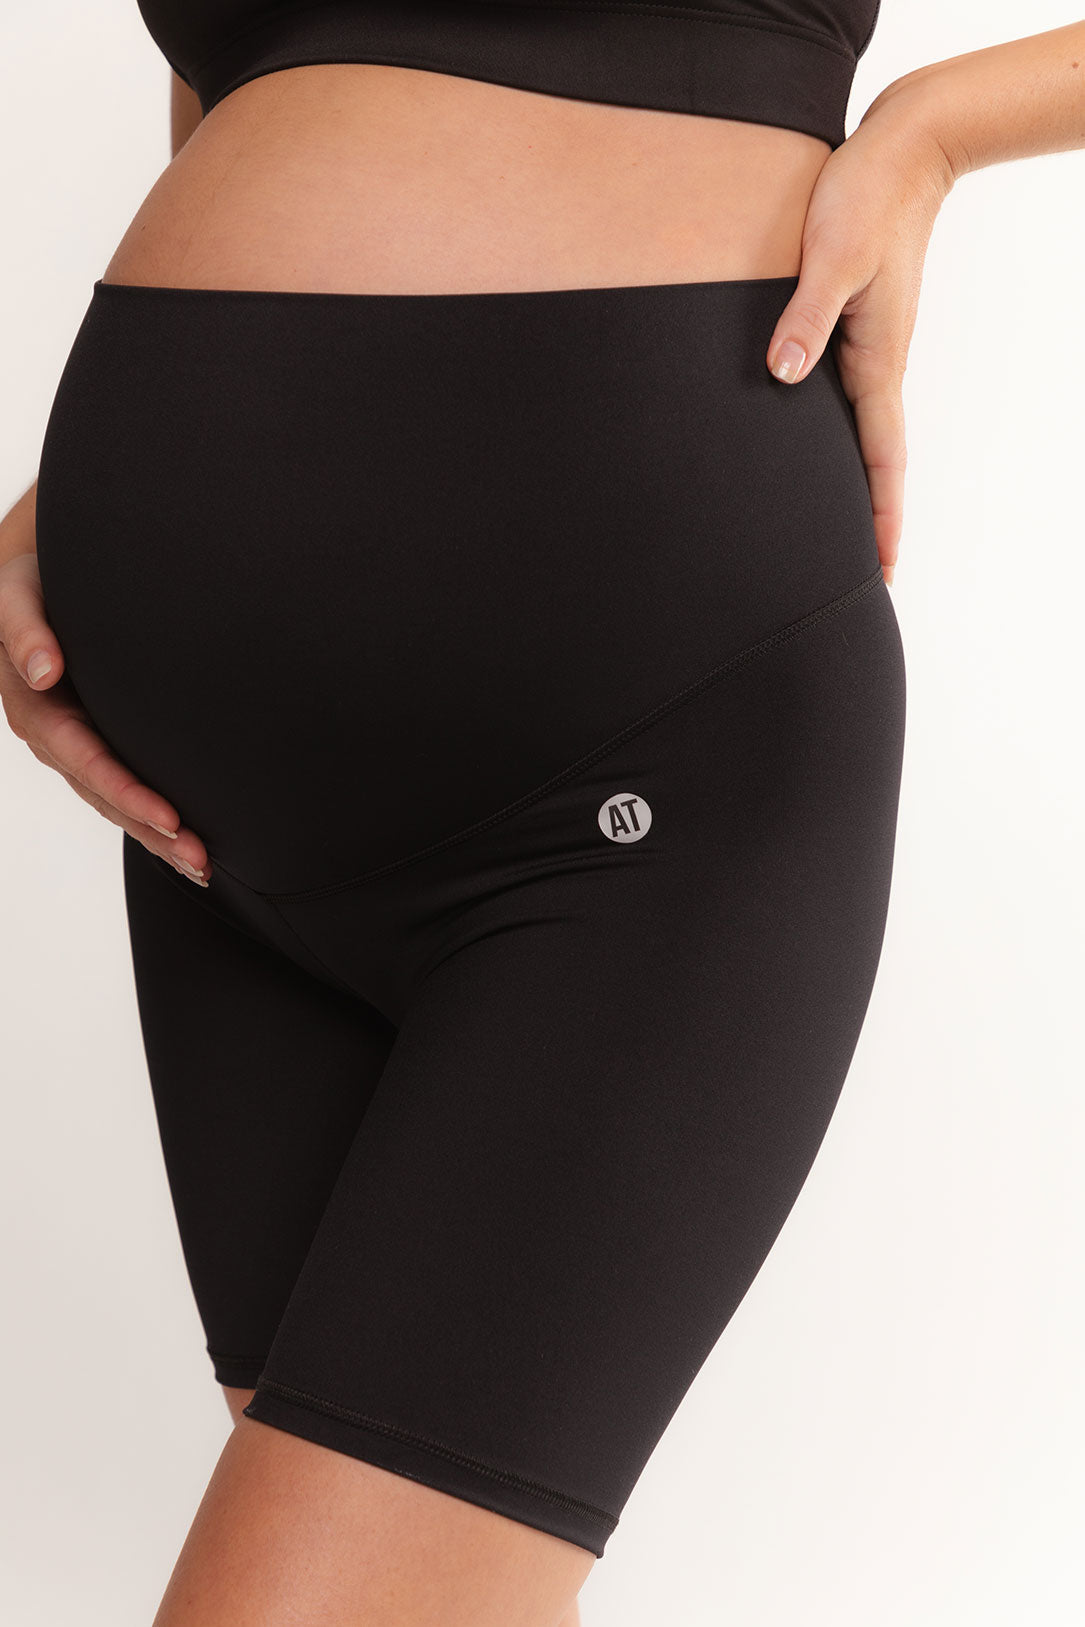 Waverleigh Black Maternity Biker Short, 15 Maternity Workout Shorts to  Support Your Growing Bump While You Exercise